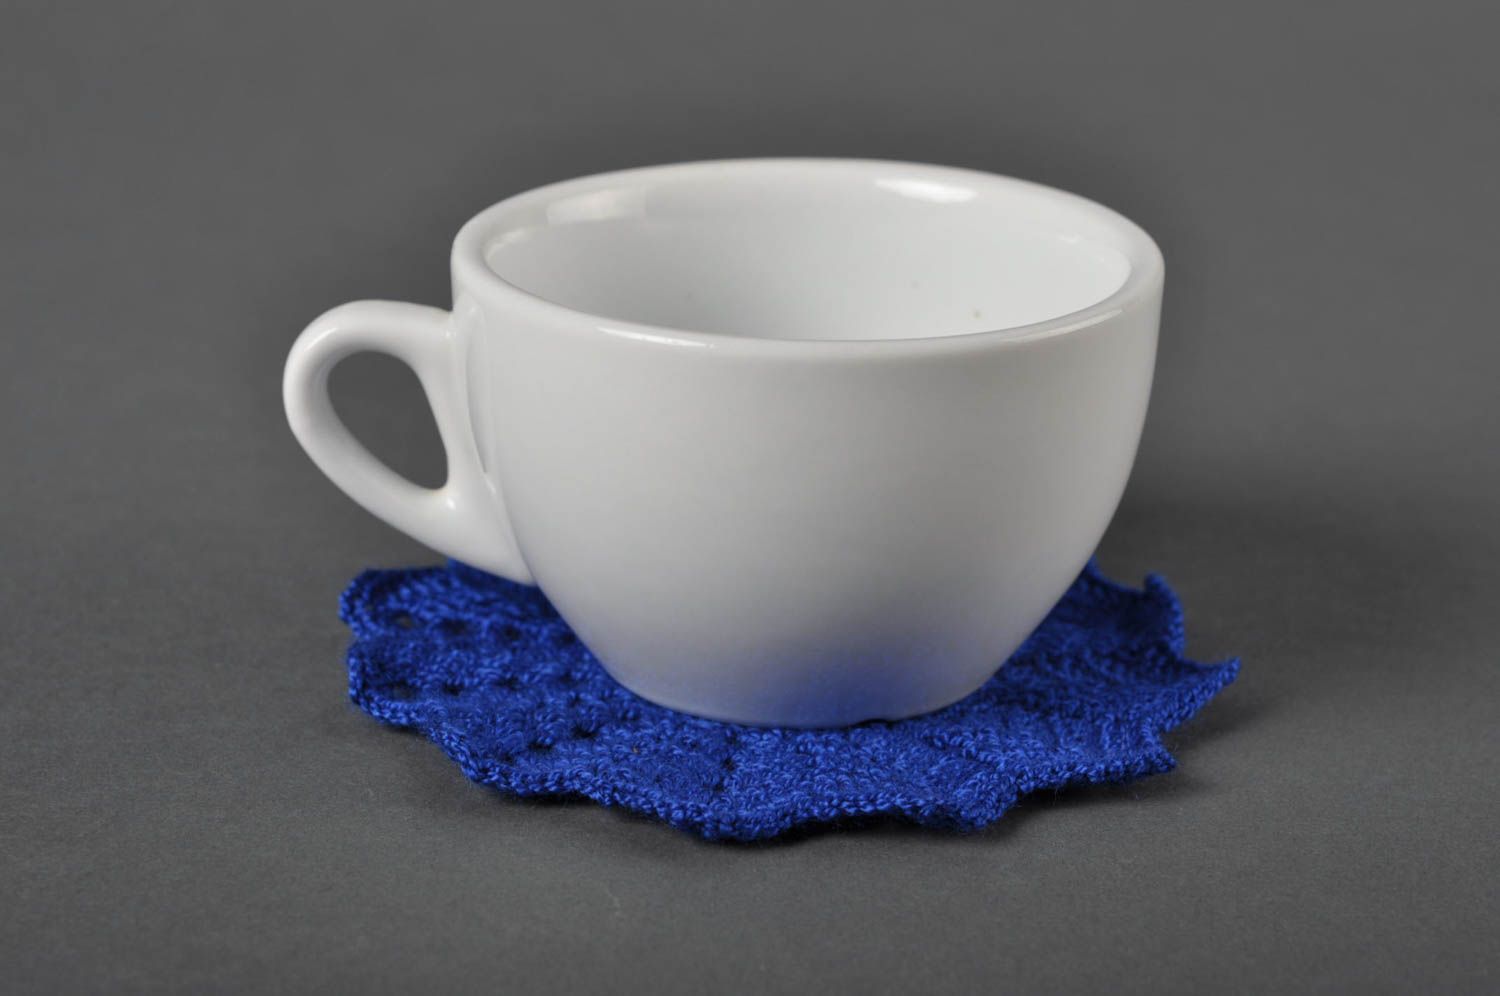 Stand for hot handmade stand cute blue stand for cup woven stand for dishes photo 2